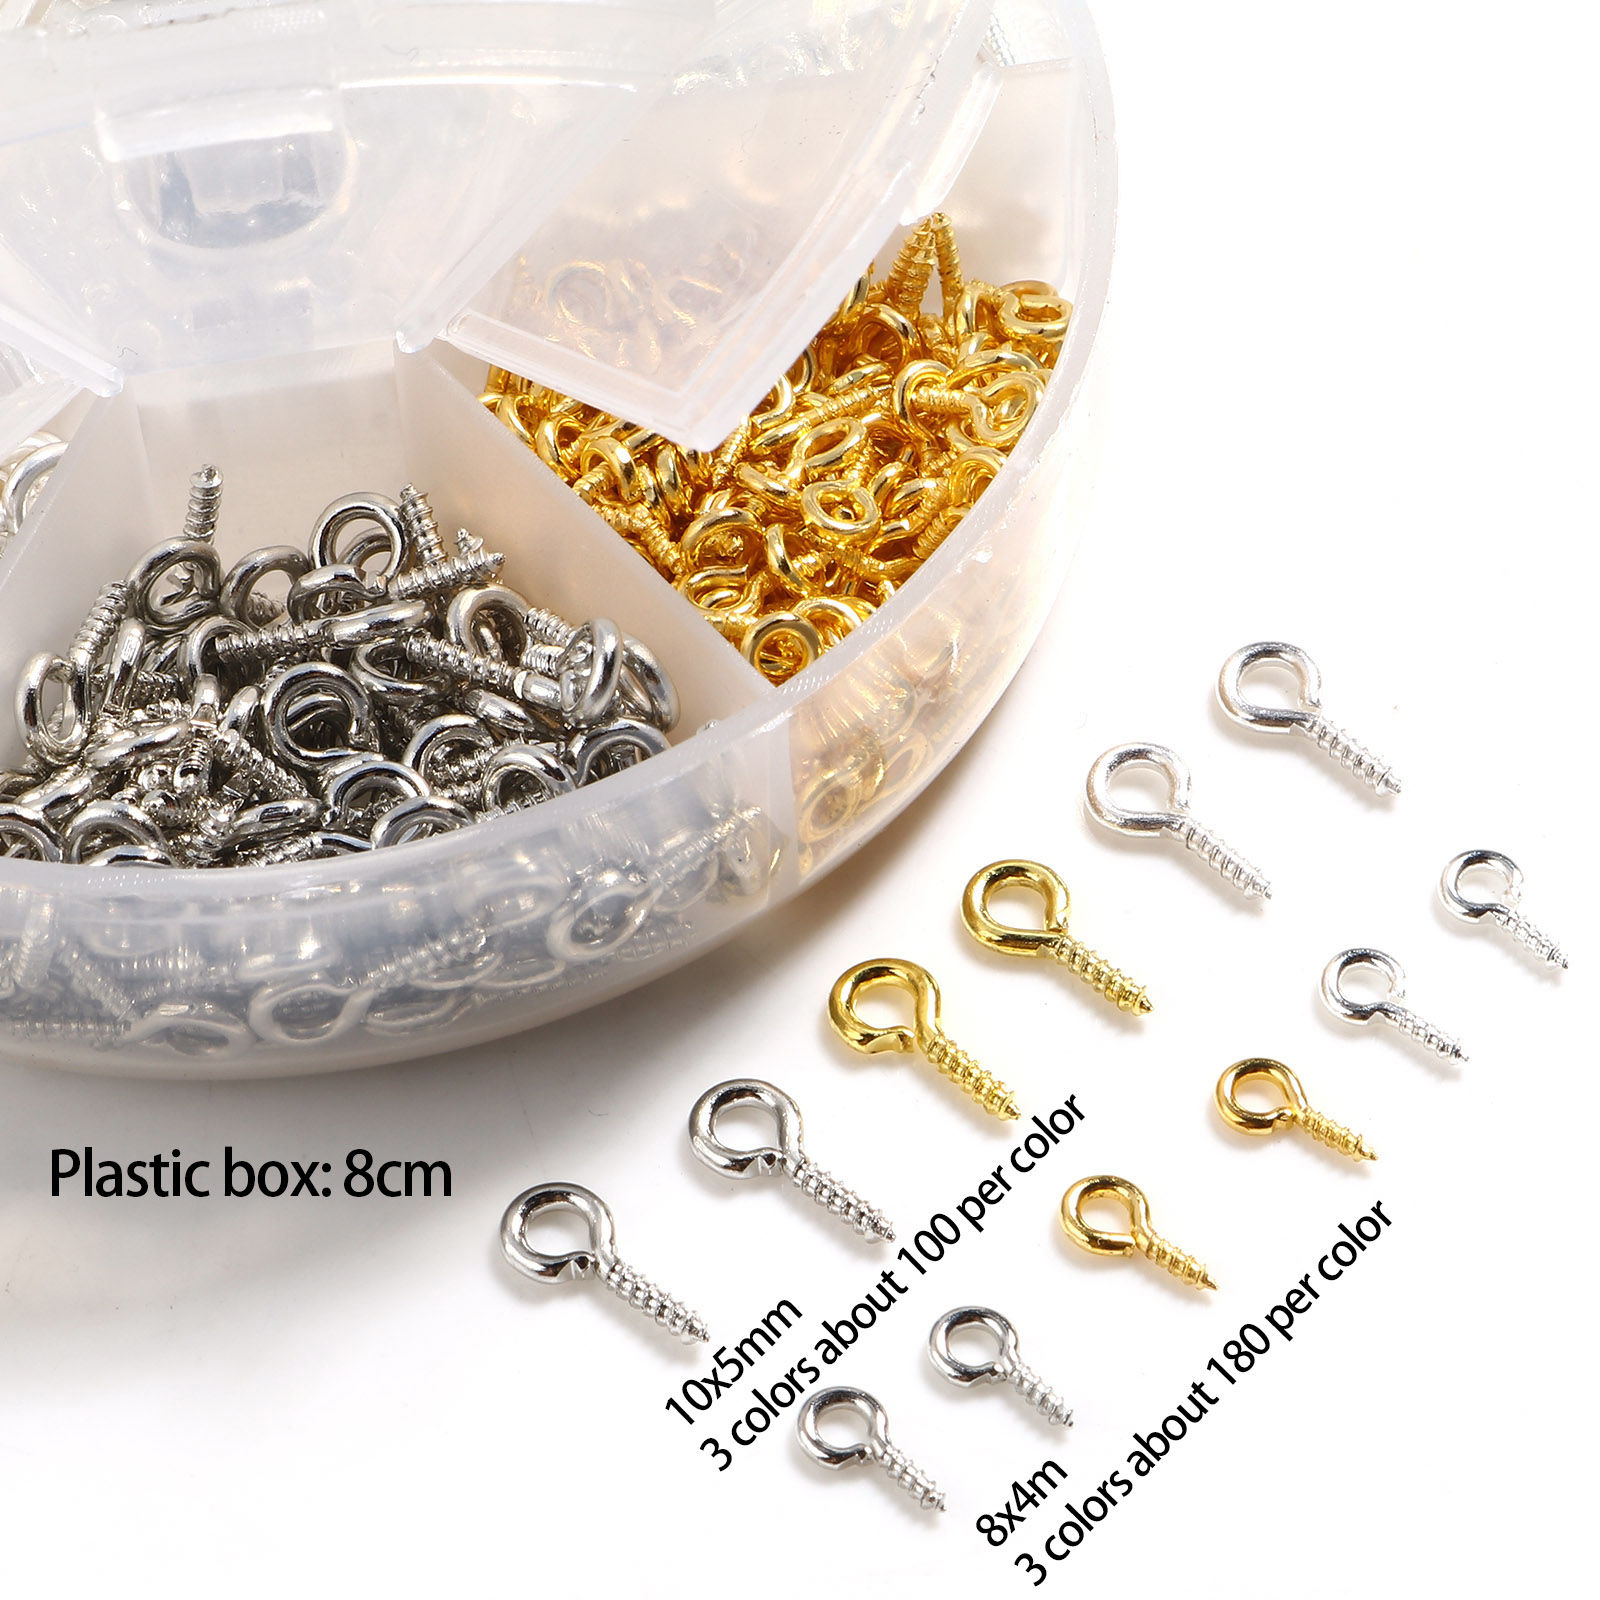 Picture of Iron Based Alloy Jewelry Accessories Screw Eyes Bails Top Drilled Findings Mixed 10mm x 5mm 8mm x 4mm, 1 Box